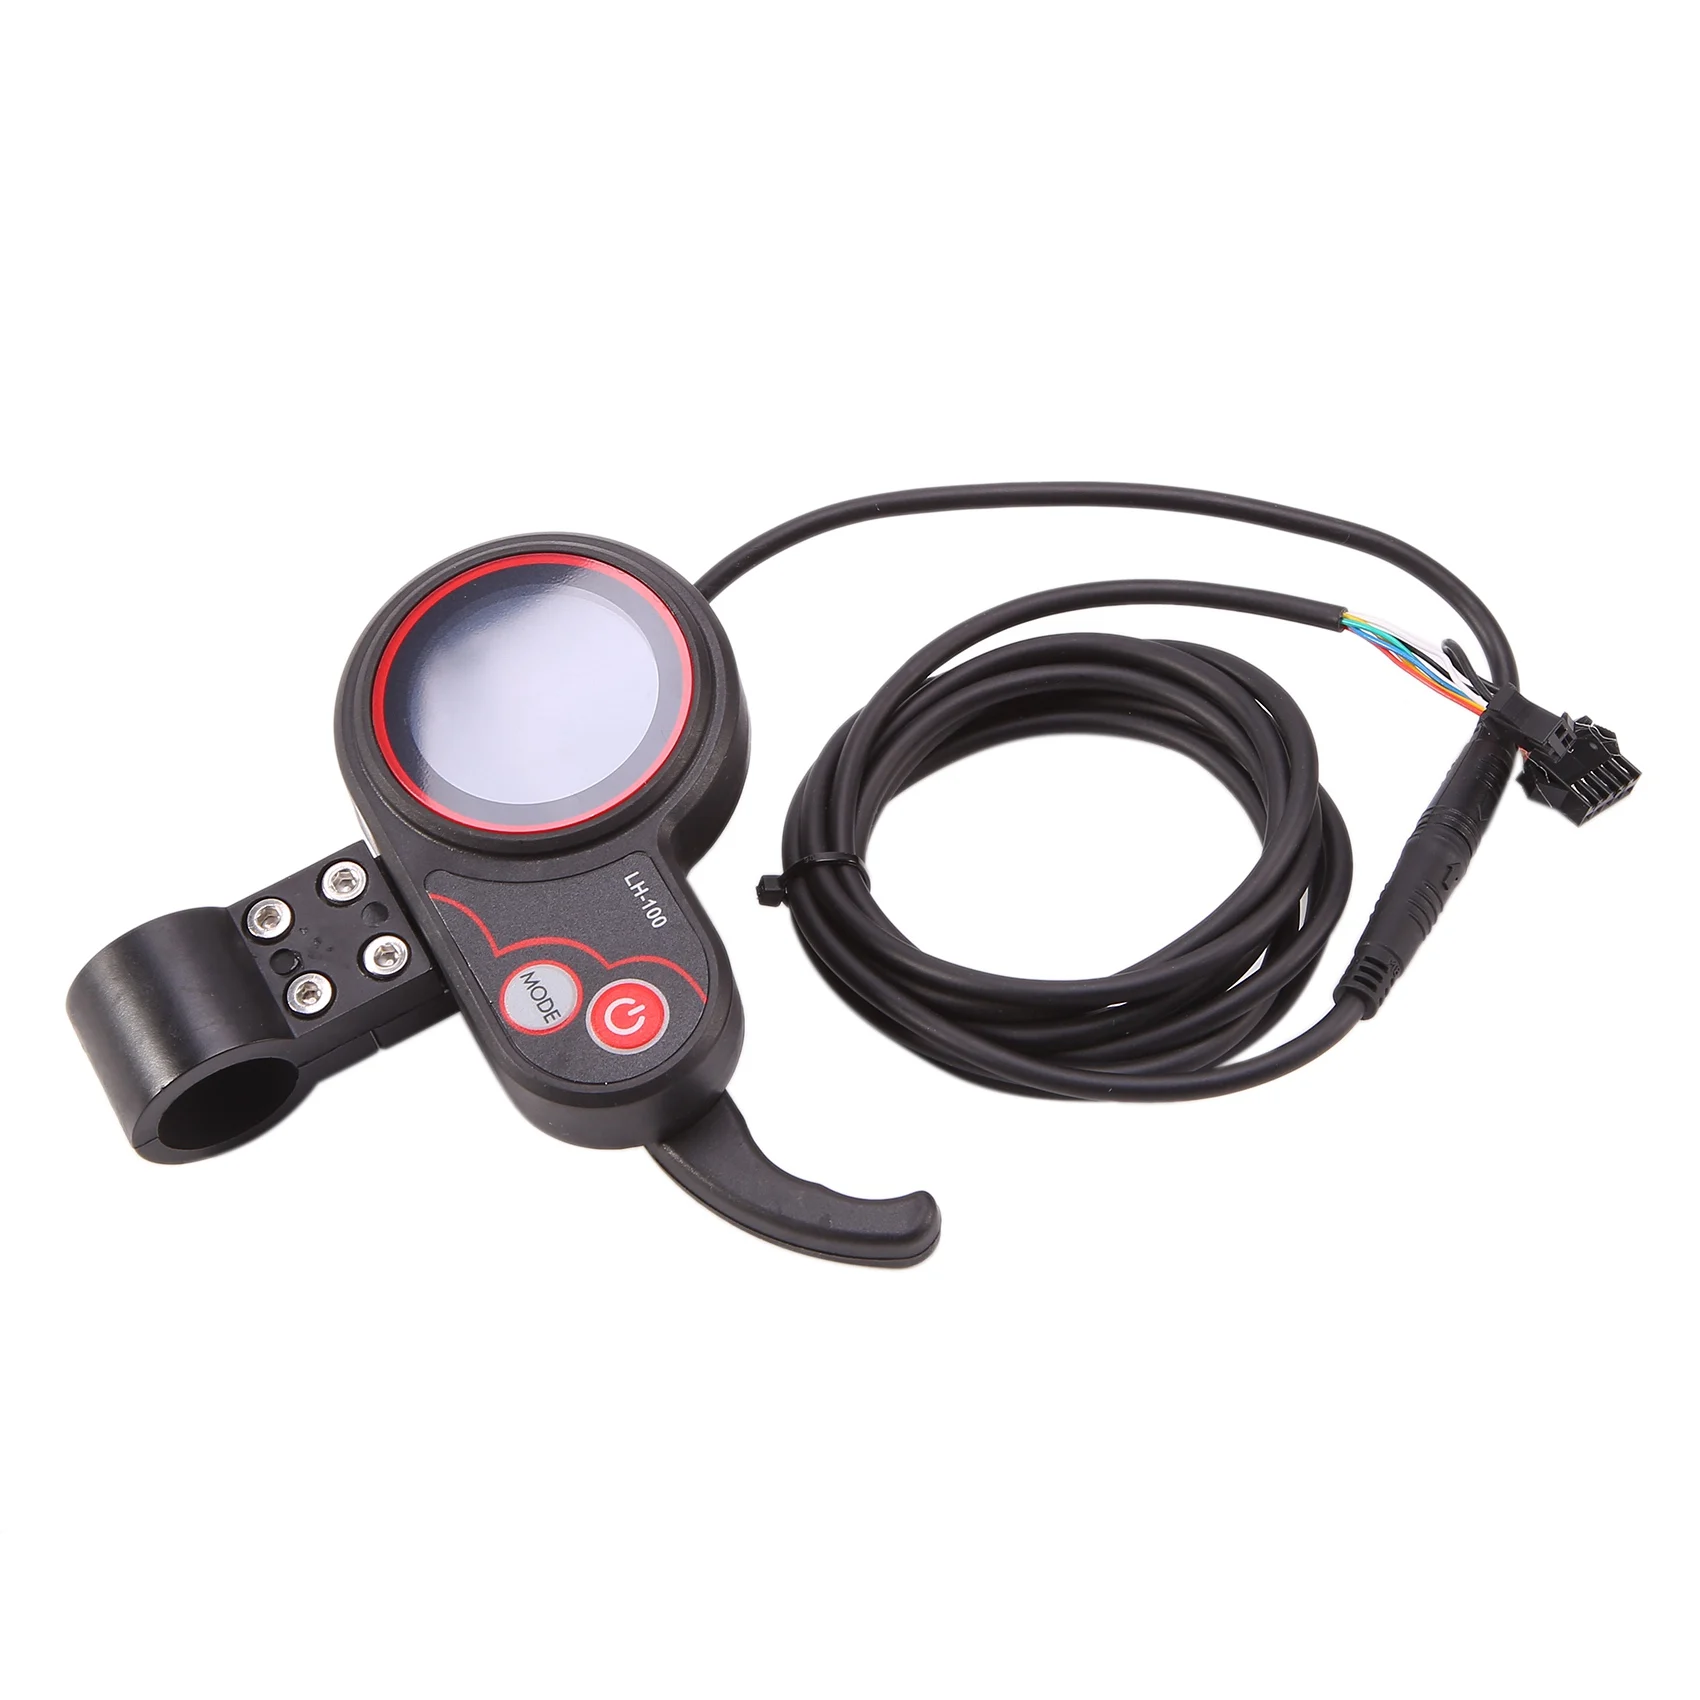 

LCD-LH100 24V/36V/48V/60V 6 Pins Electric Bike Display Thumb Throttle Speedometer Control Panel for Electric Scooter